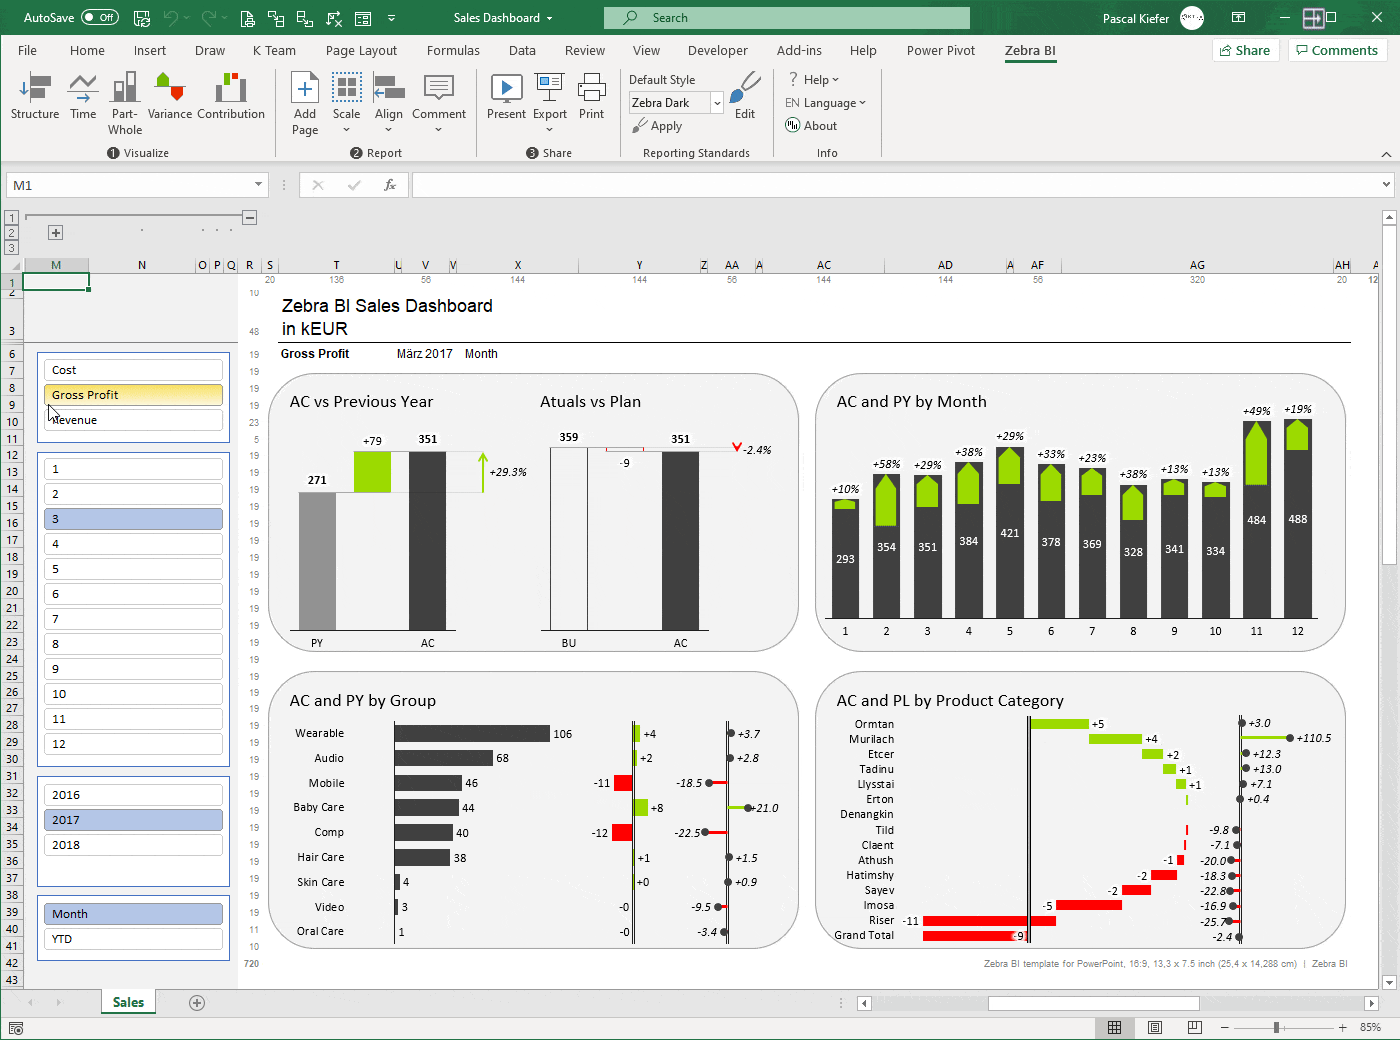 Managerial & Project Dashboard